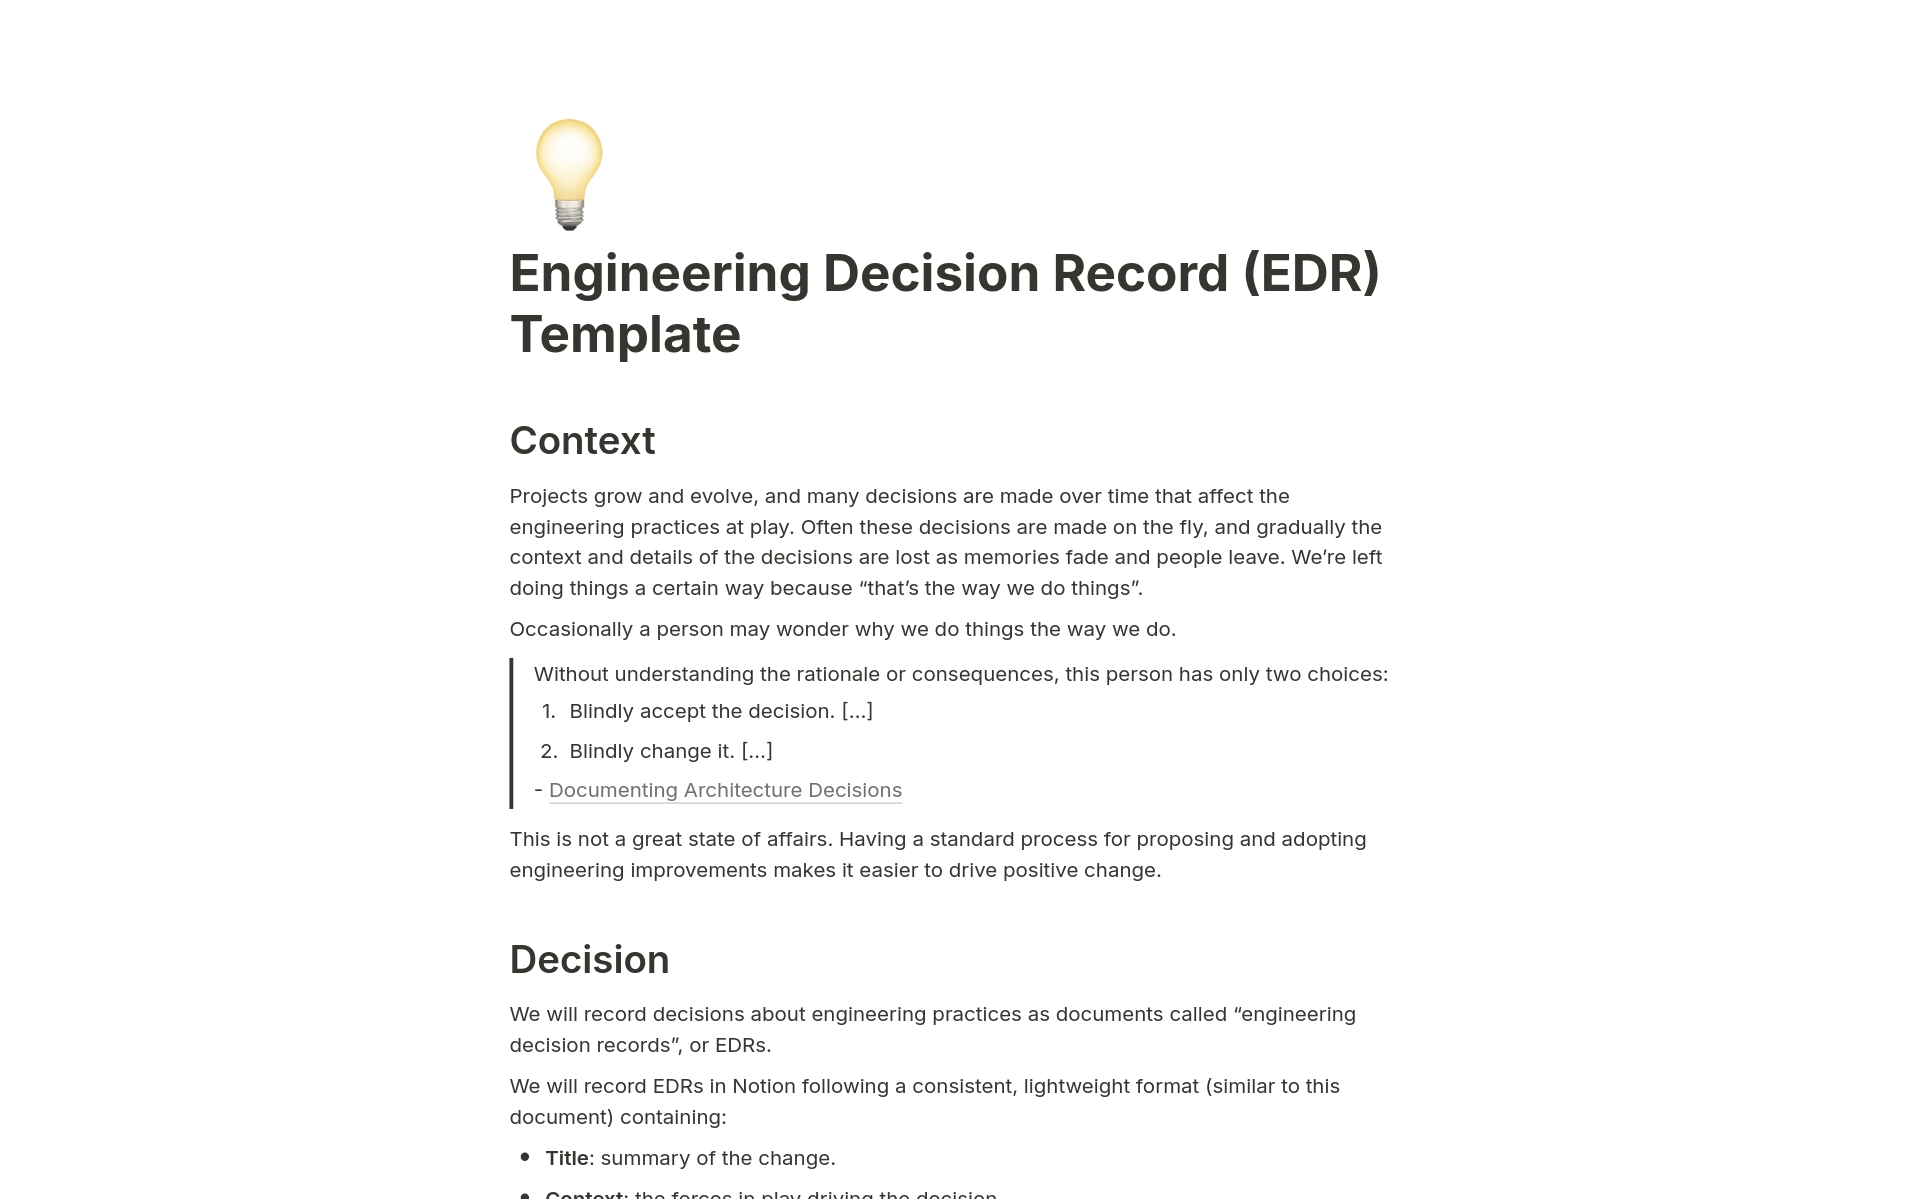 A standard form to propose and record changes to engineering practices, inspired by Architecture Decision Records (ADRs). Easily capture relevant information and create a historical record of why things are the way they are.